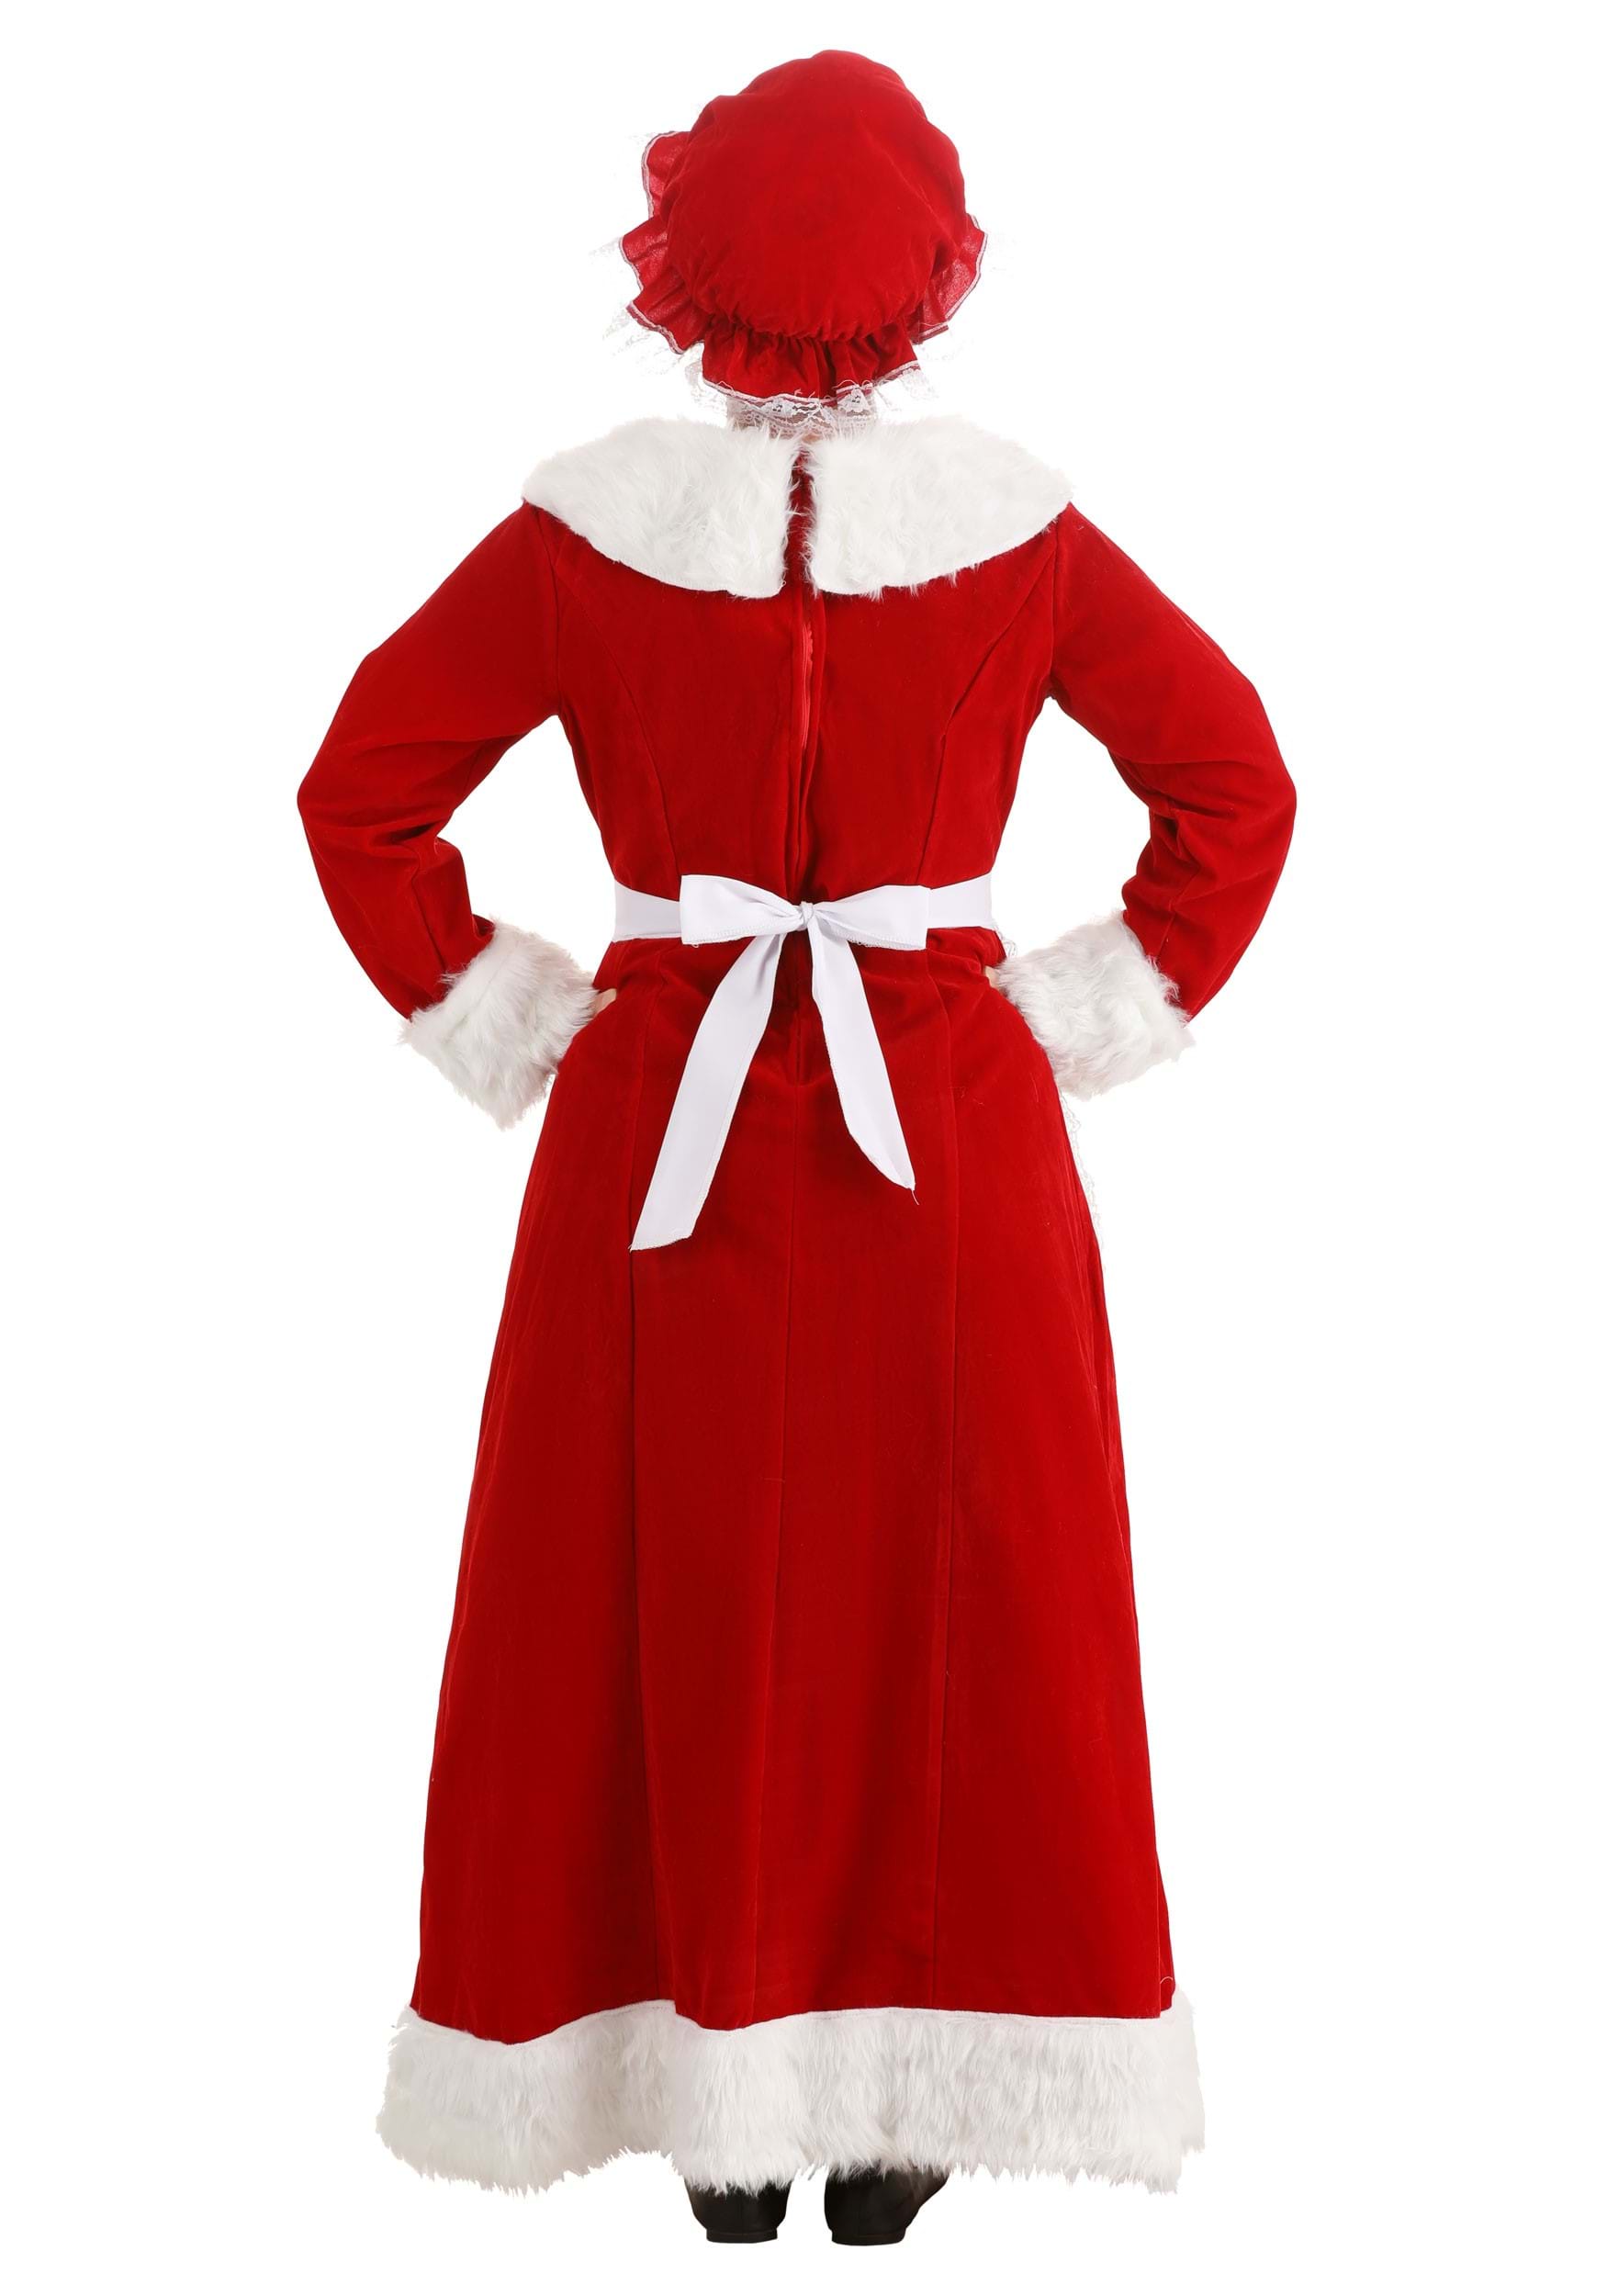 Mrs. Claus Deluxe Costume For Women